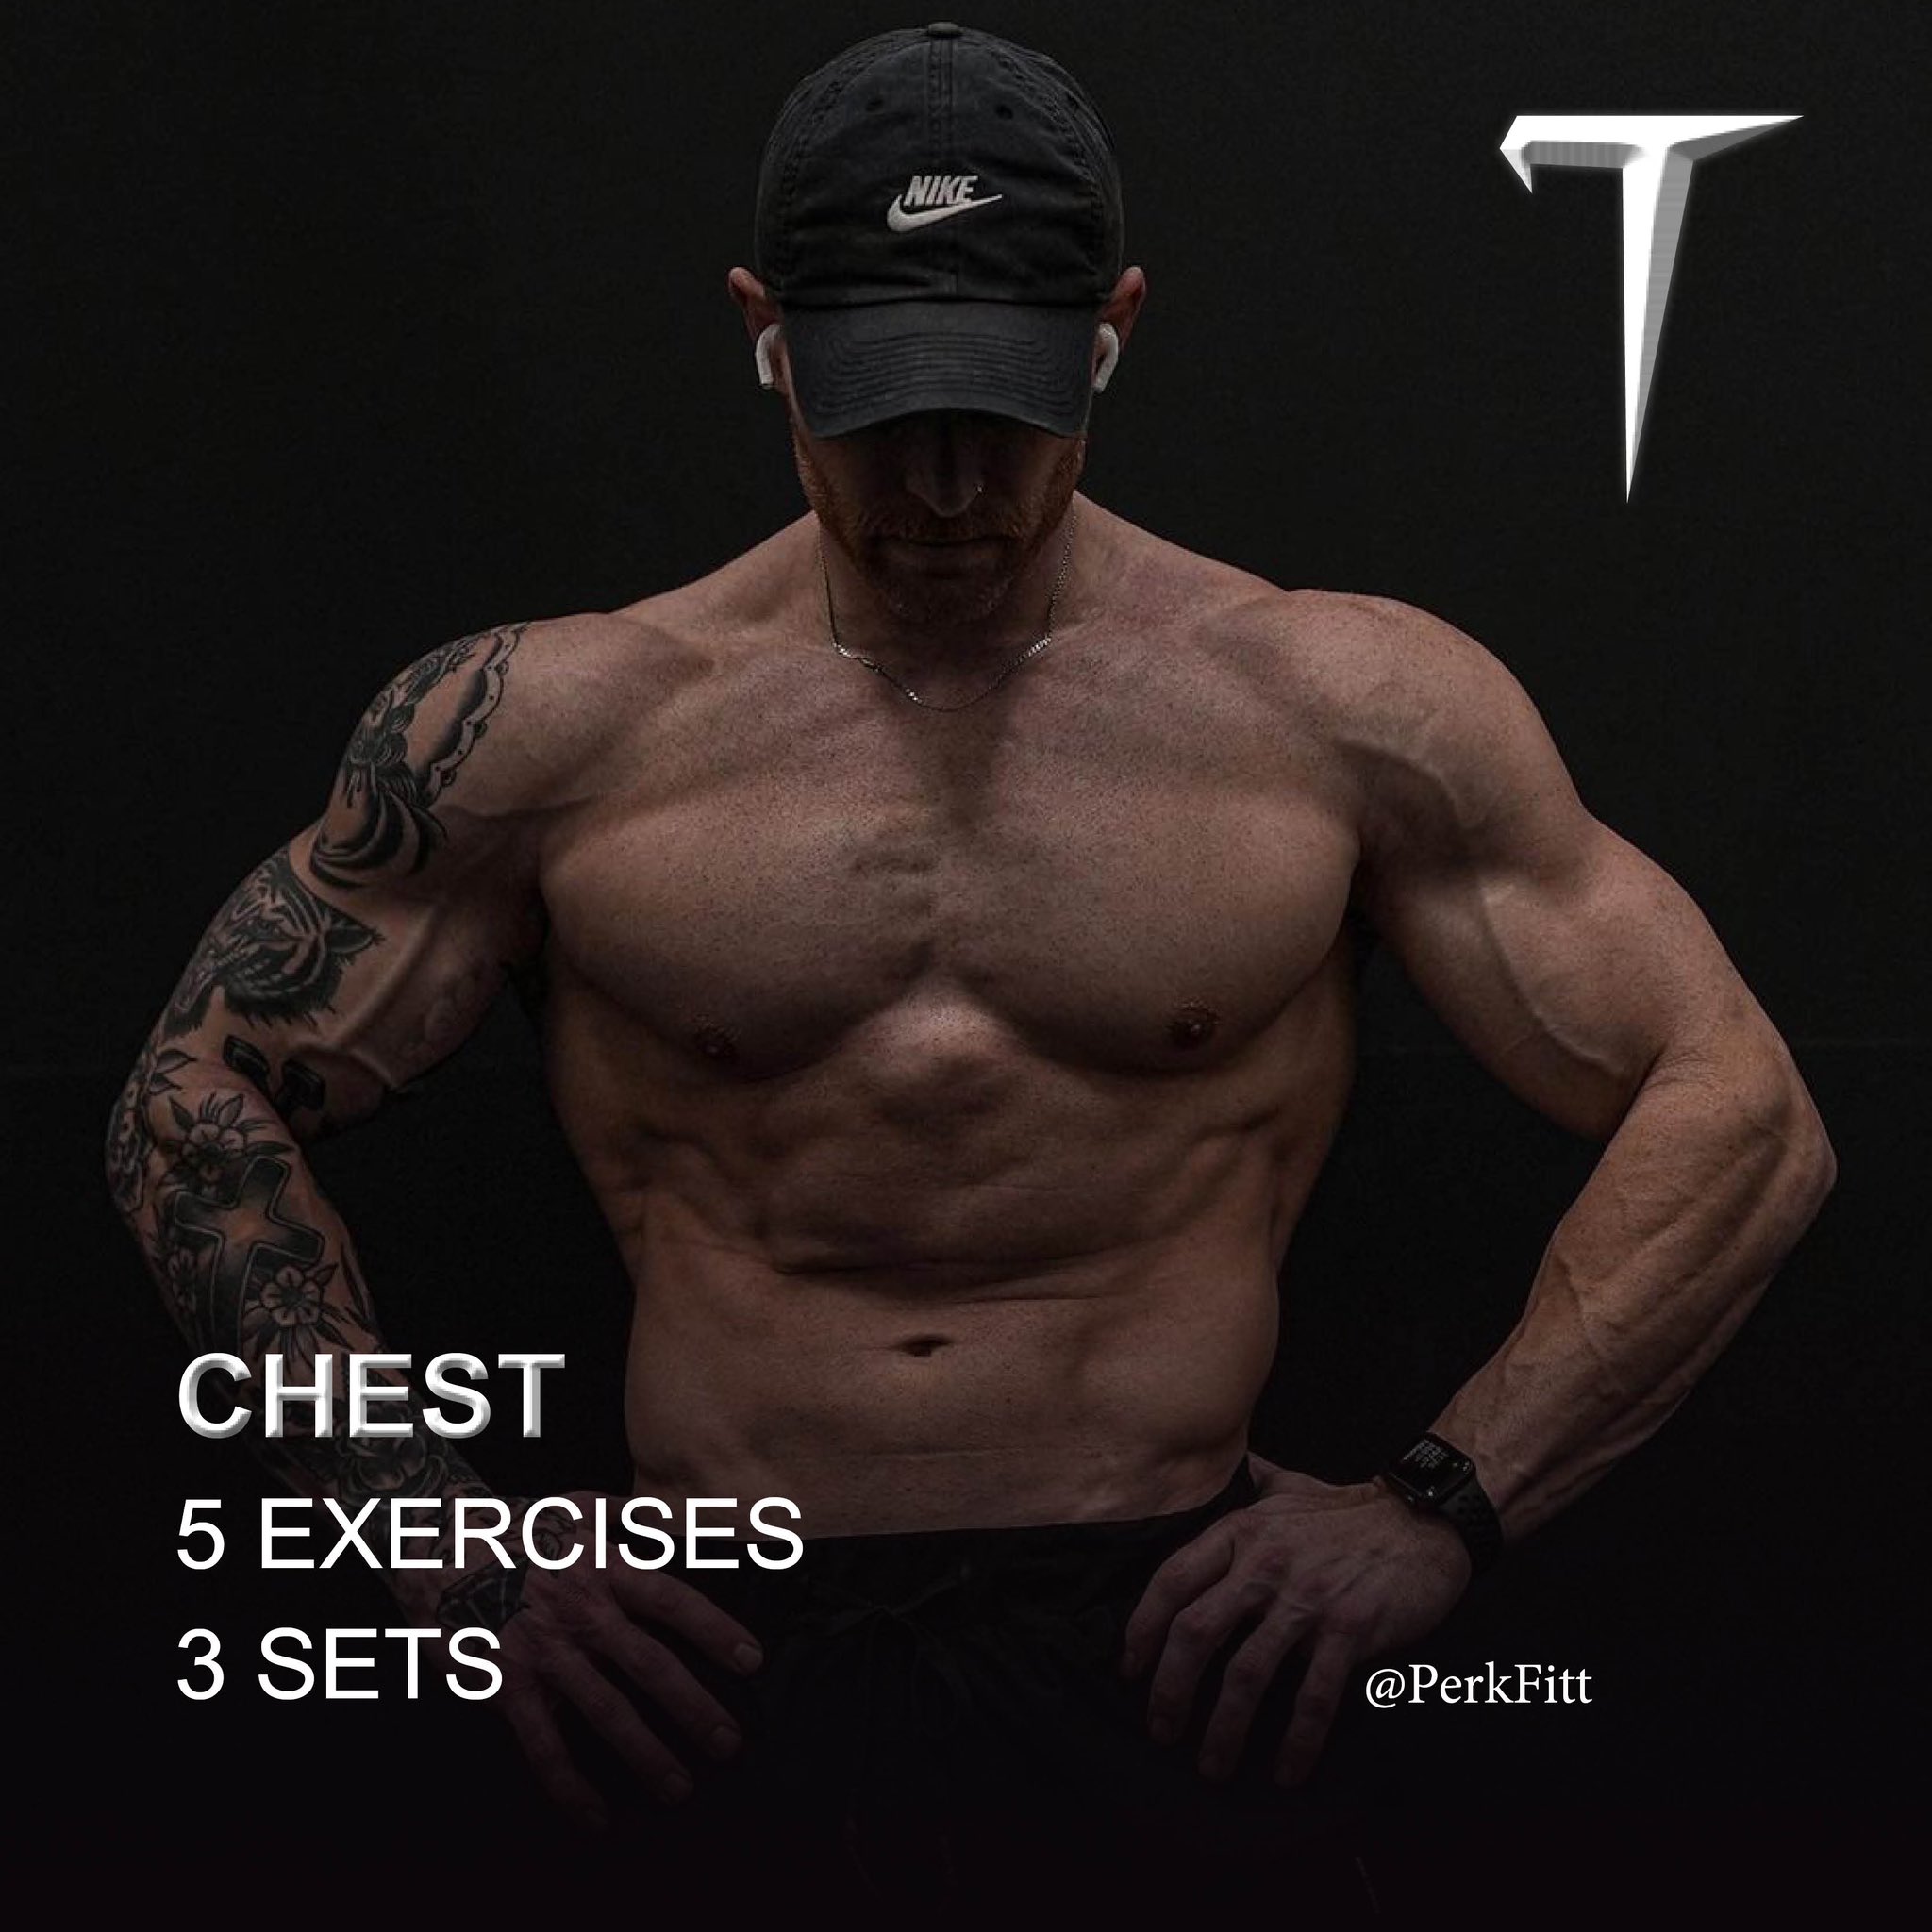 full chest workout